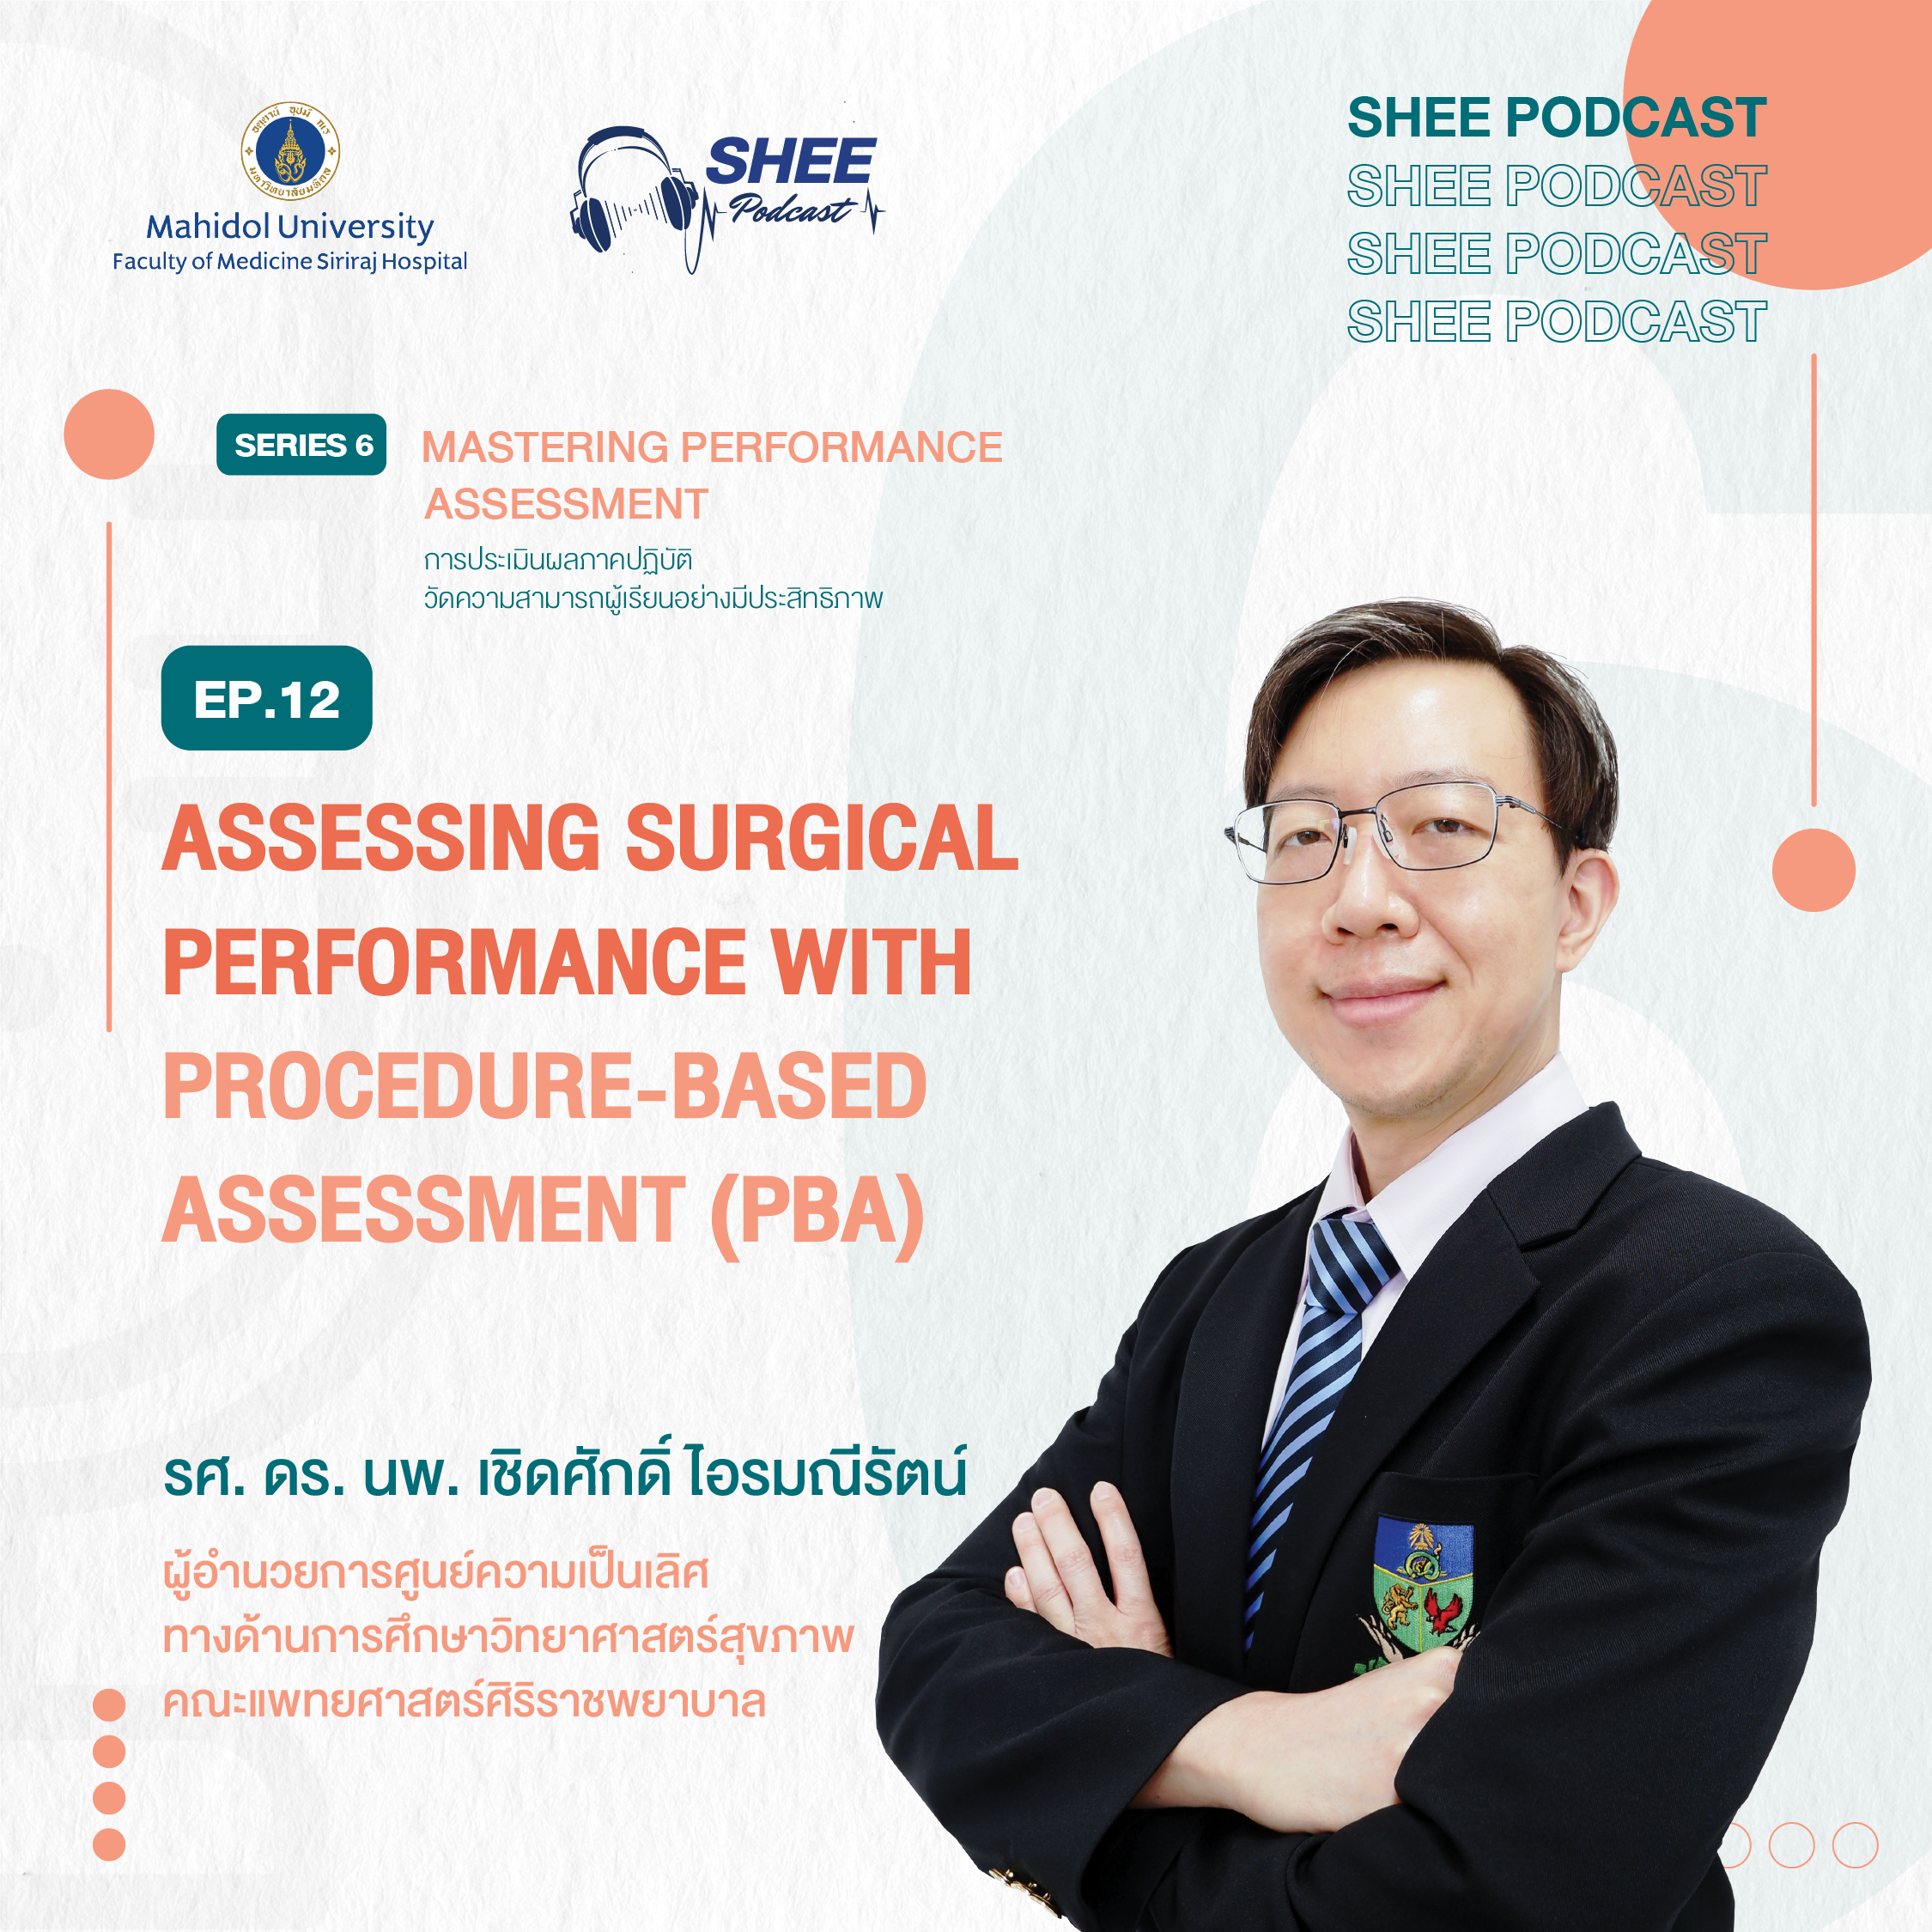 EP12 : Assessing surgical performance with procedure-based assessment (PBA)